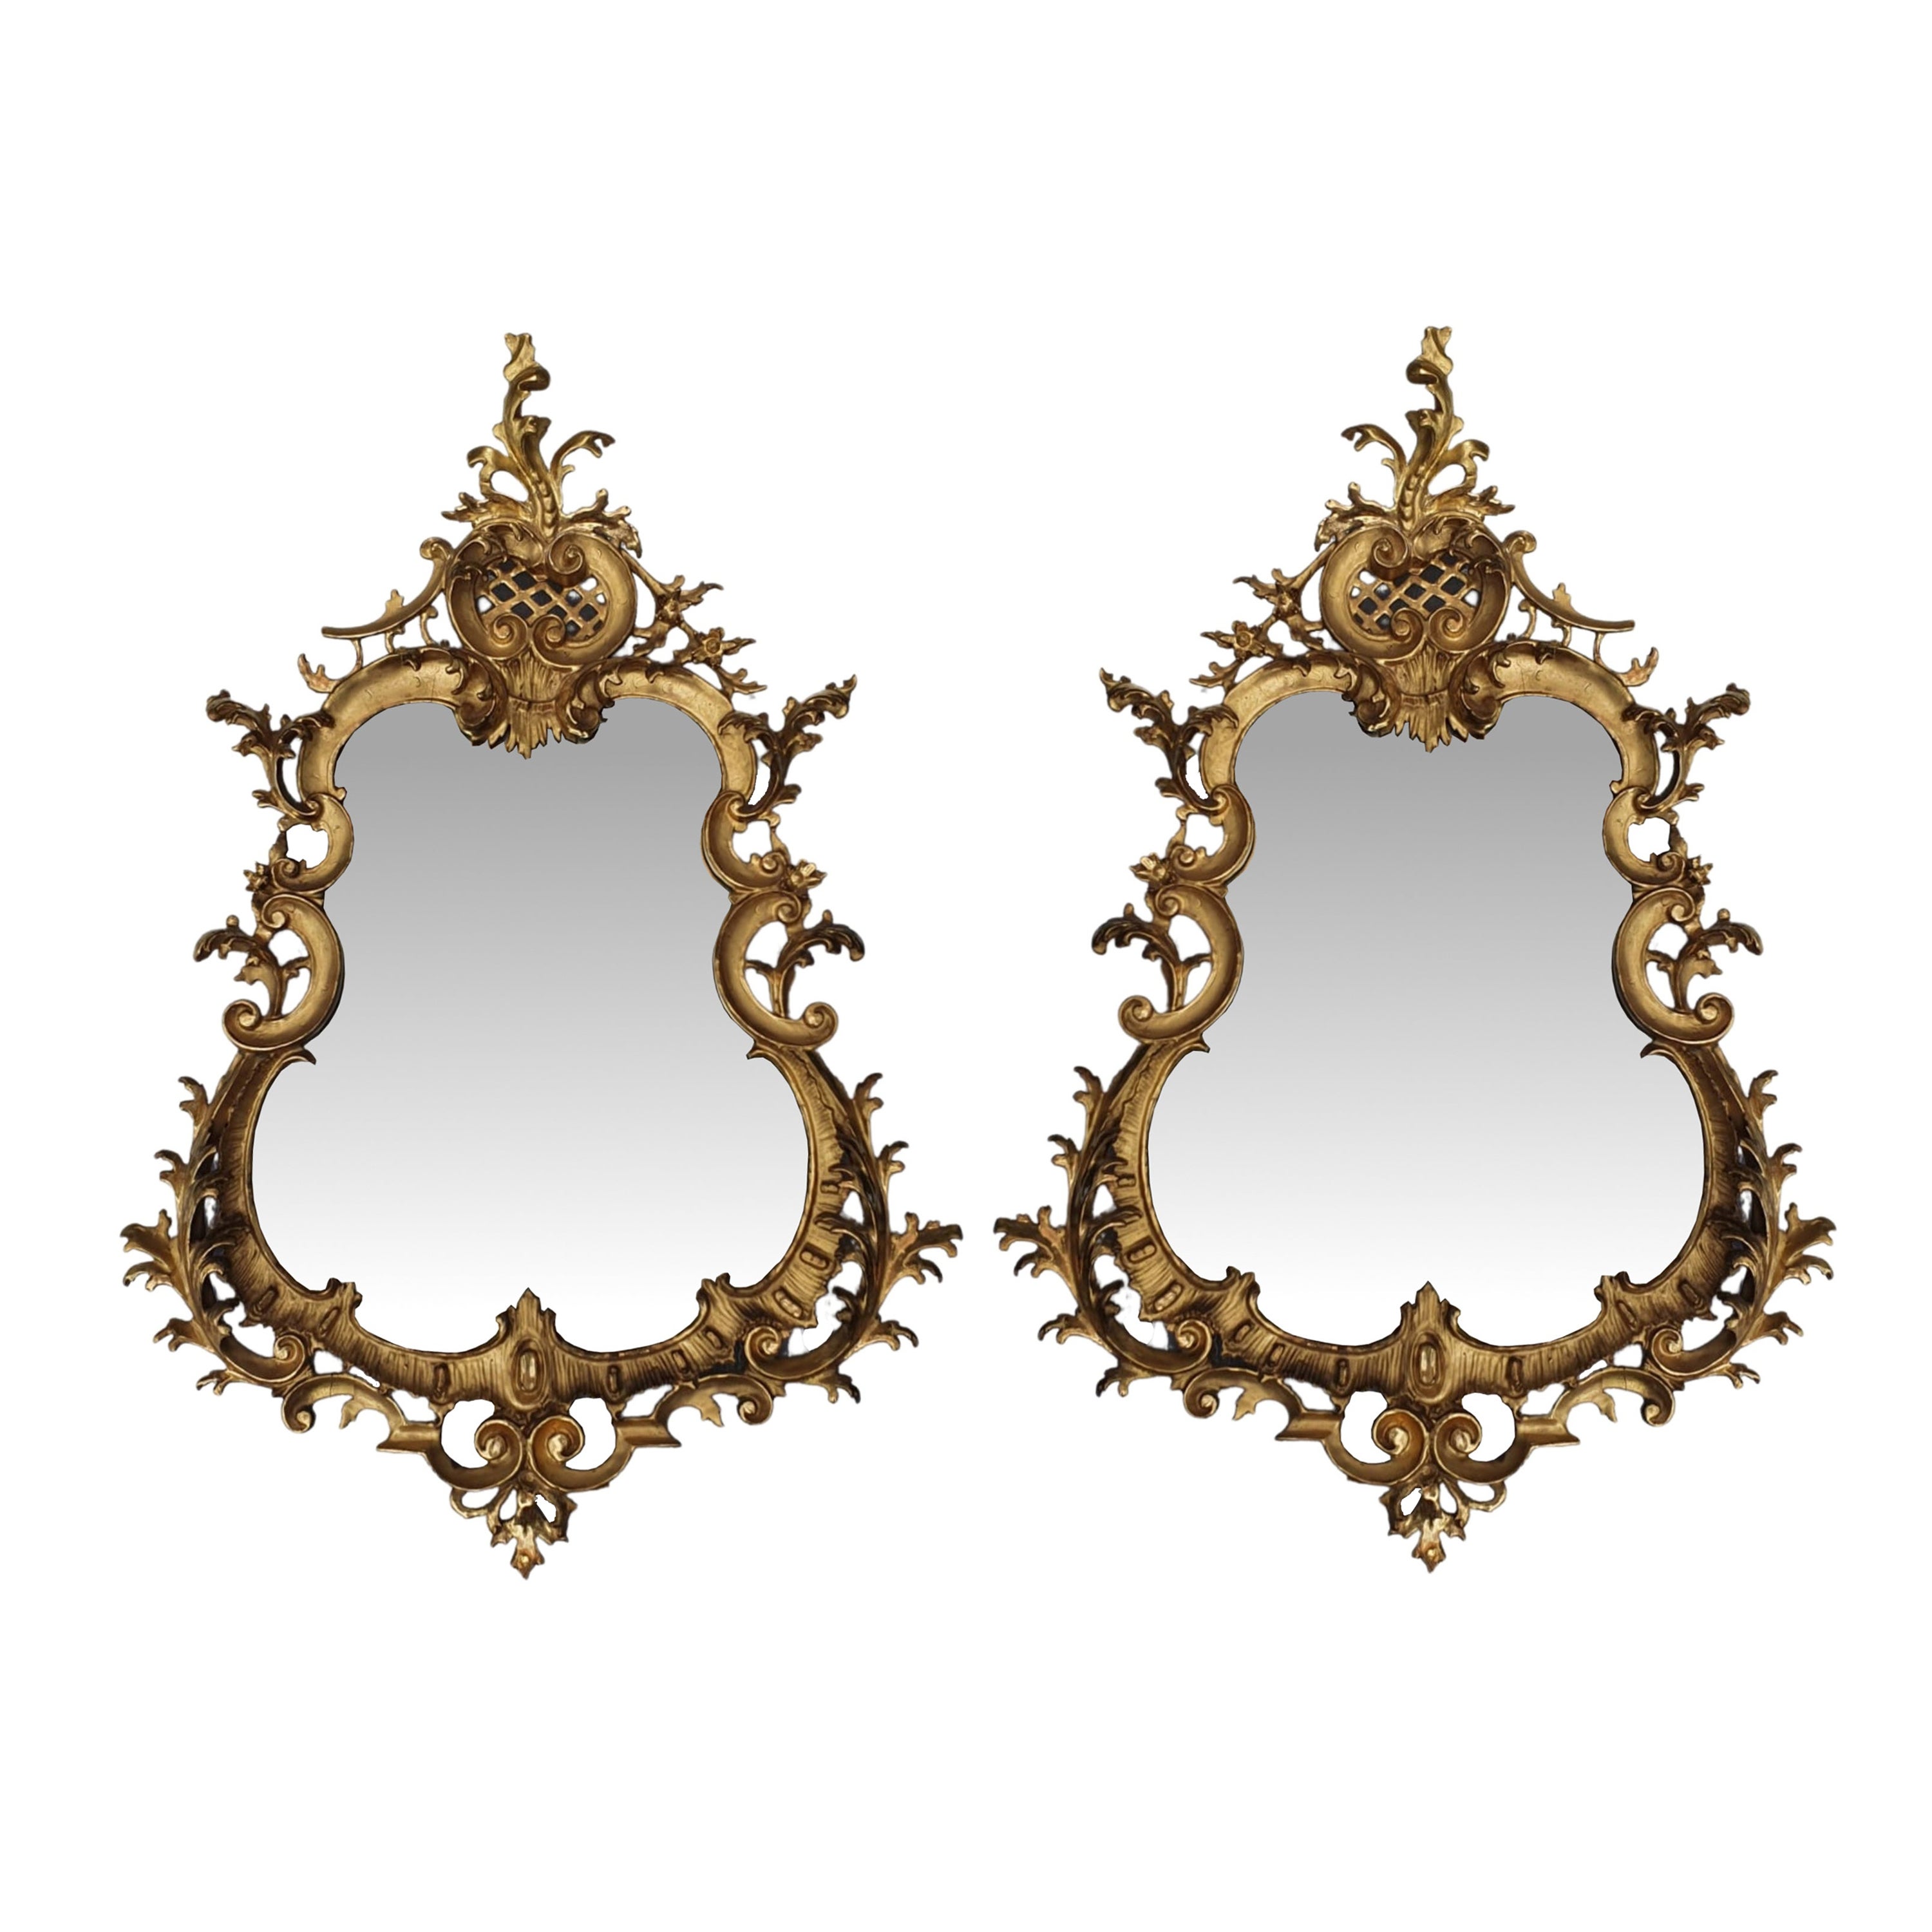 Rare Pair of 19th Century Pier Giltwood Mirrors in the Rococo Manner For Sale